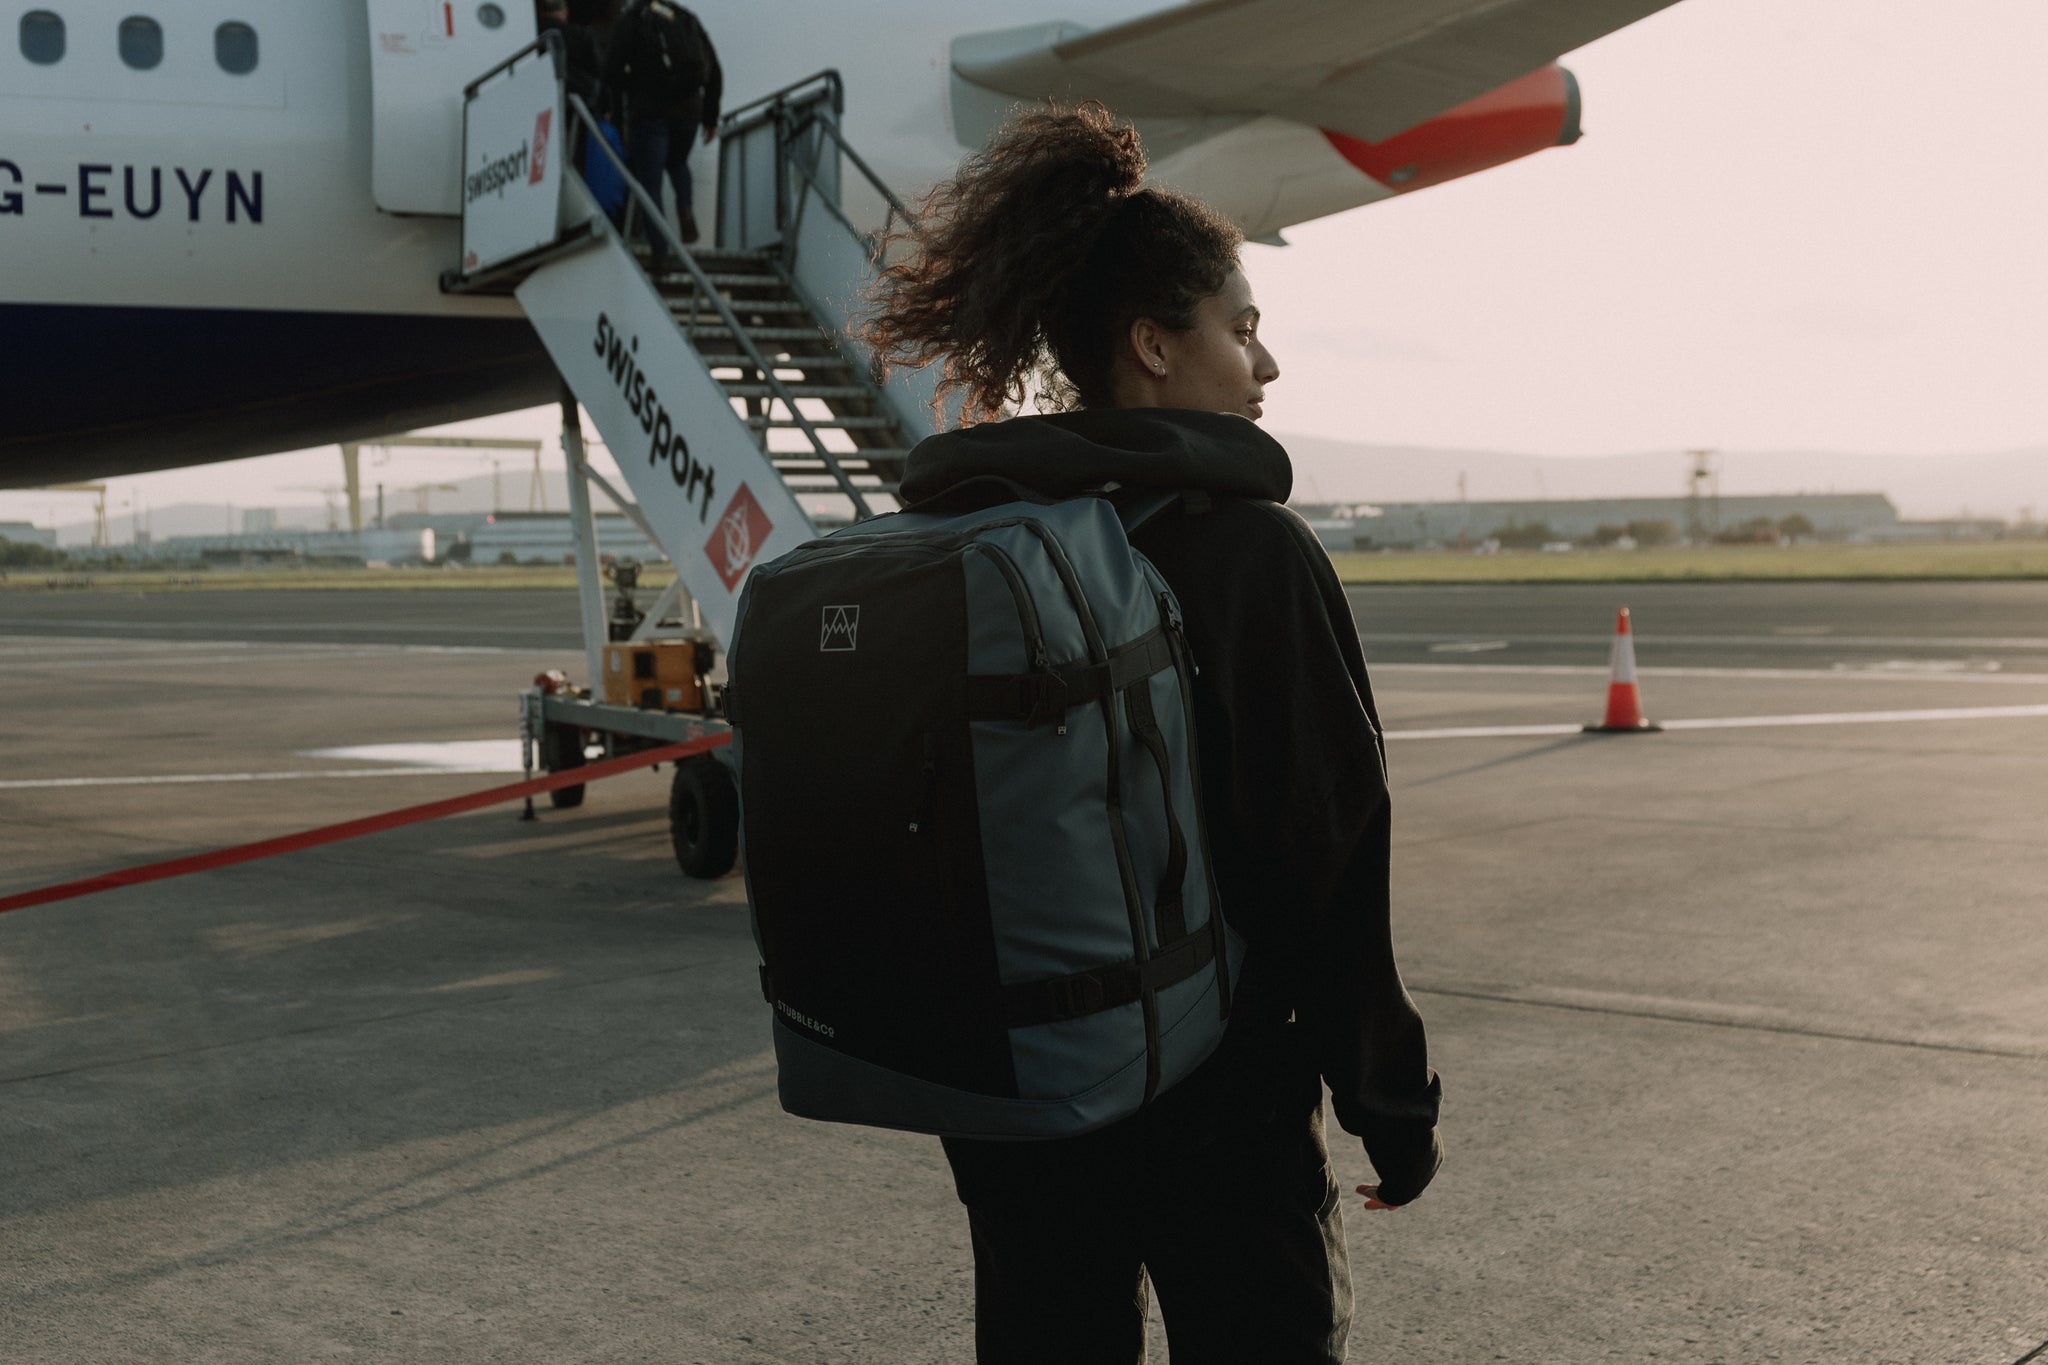 A woman standing in front of an airplane about to board wearing a tasmin blue adventure bag on her back